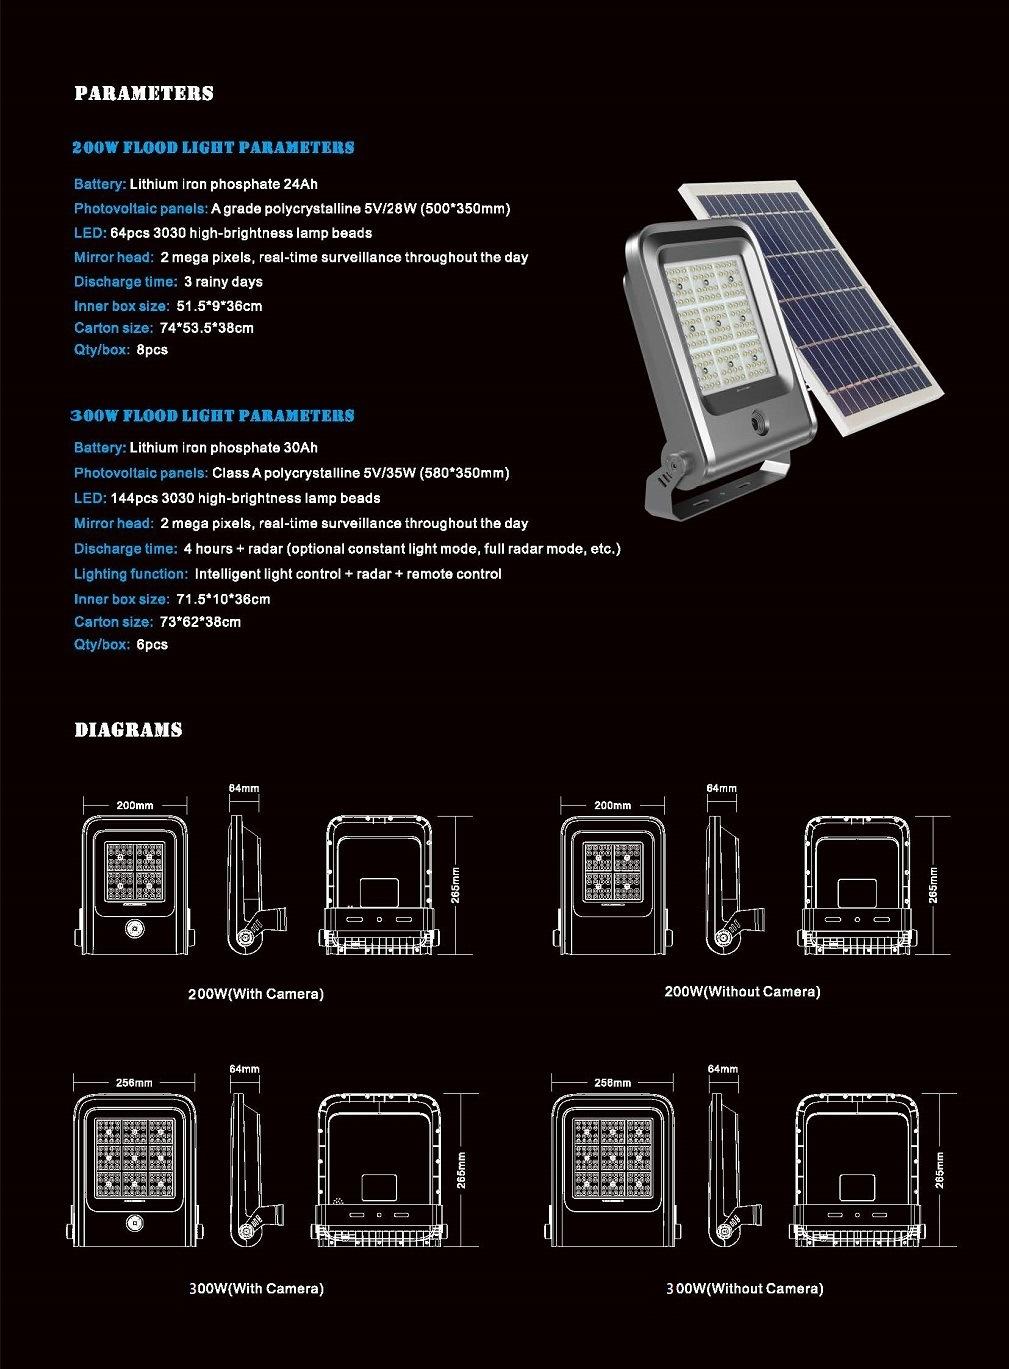 3 Modes Solar Light for Indoor Use with Switch